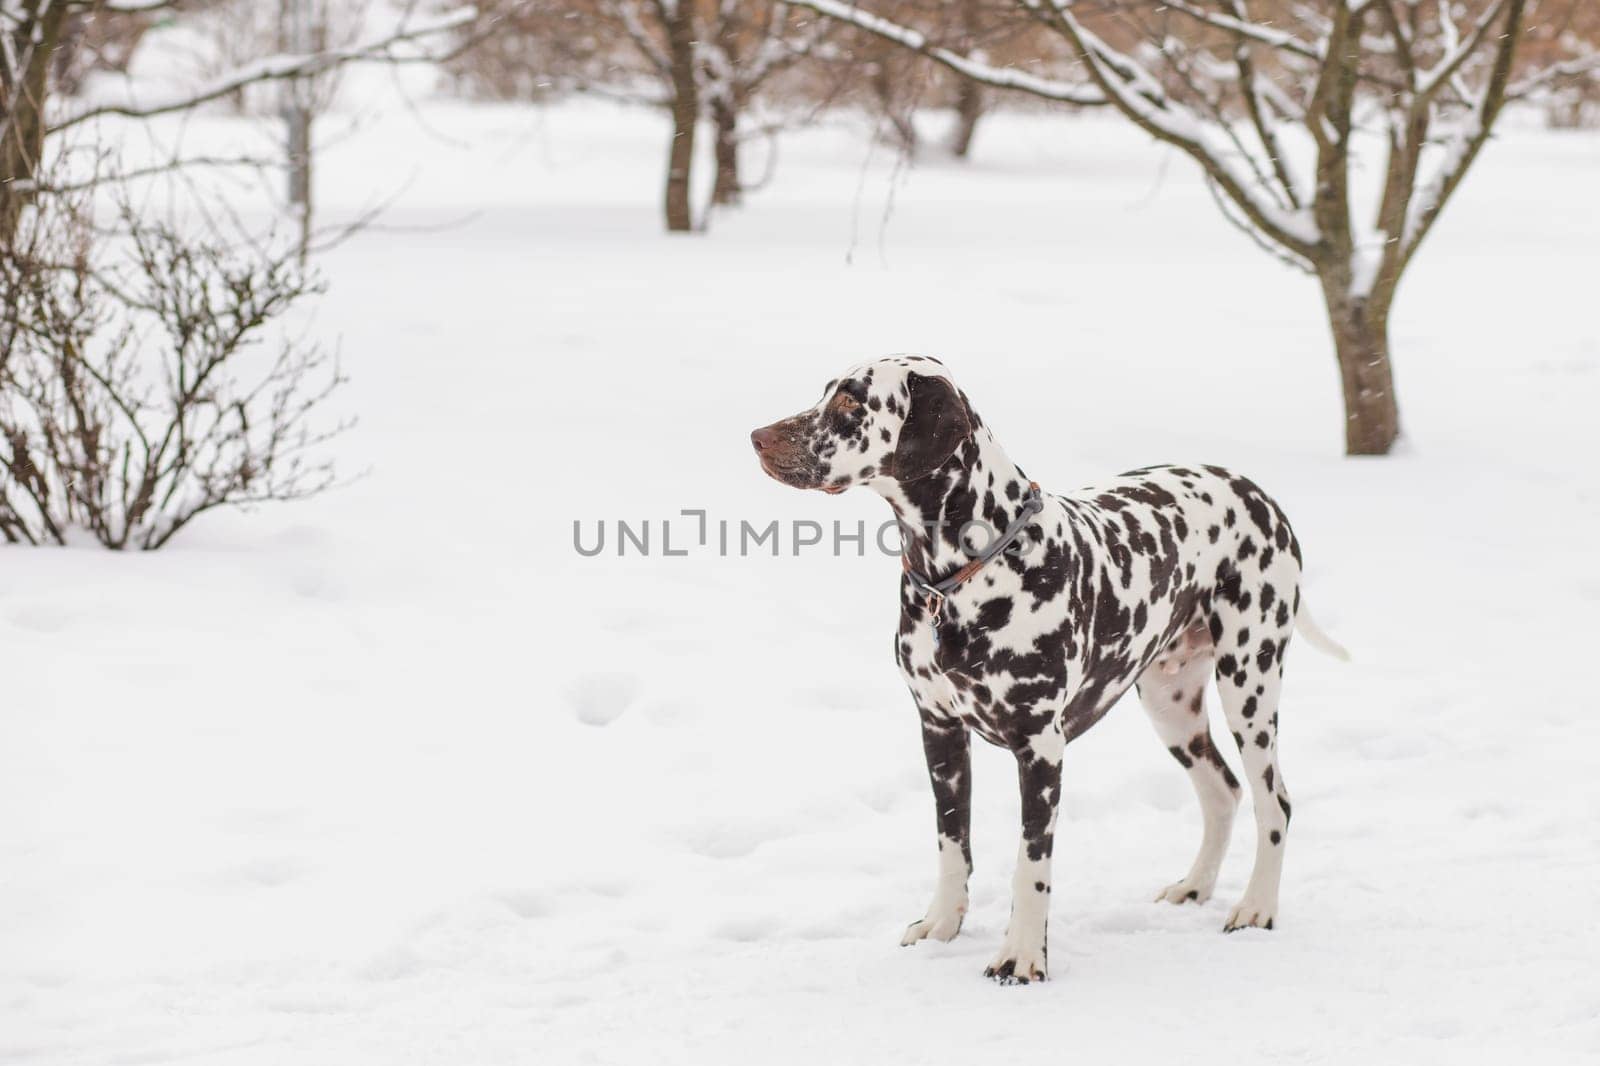 The dog breed Dalmatians in winter, the snow sits and looks beautiful